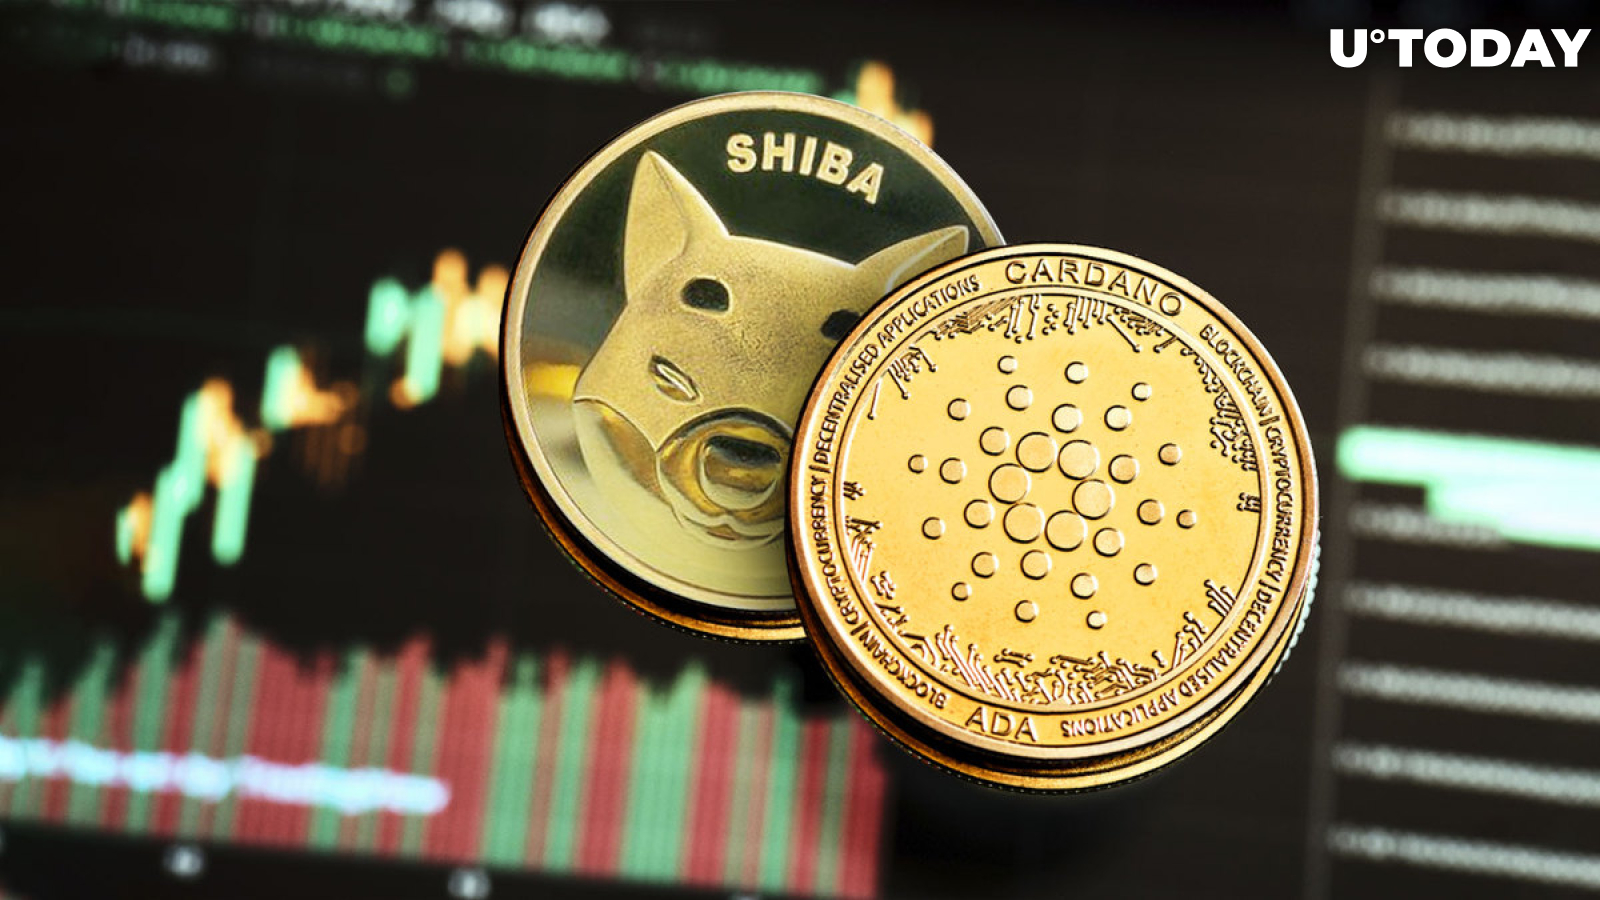 Shiba Inu (SHIB) and Cardano (ADA) Show Something You Don't Want to Miss